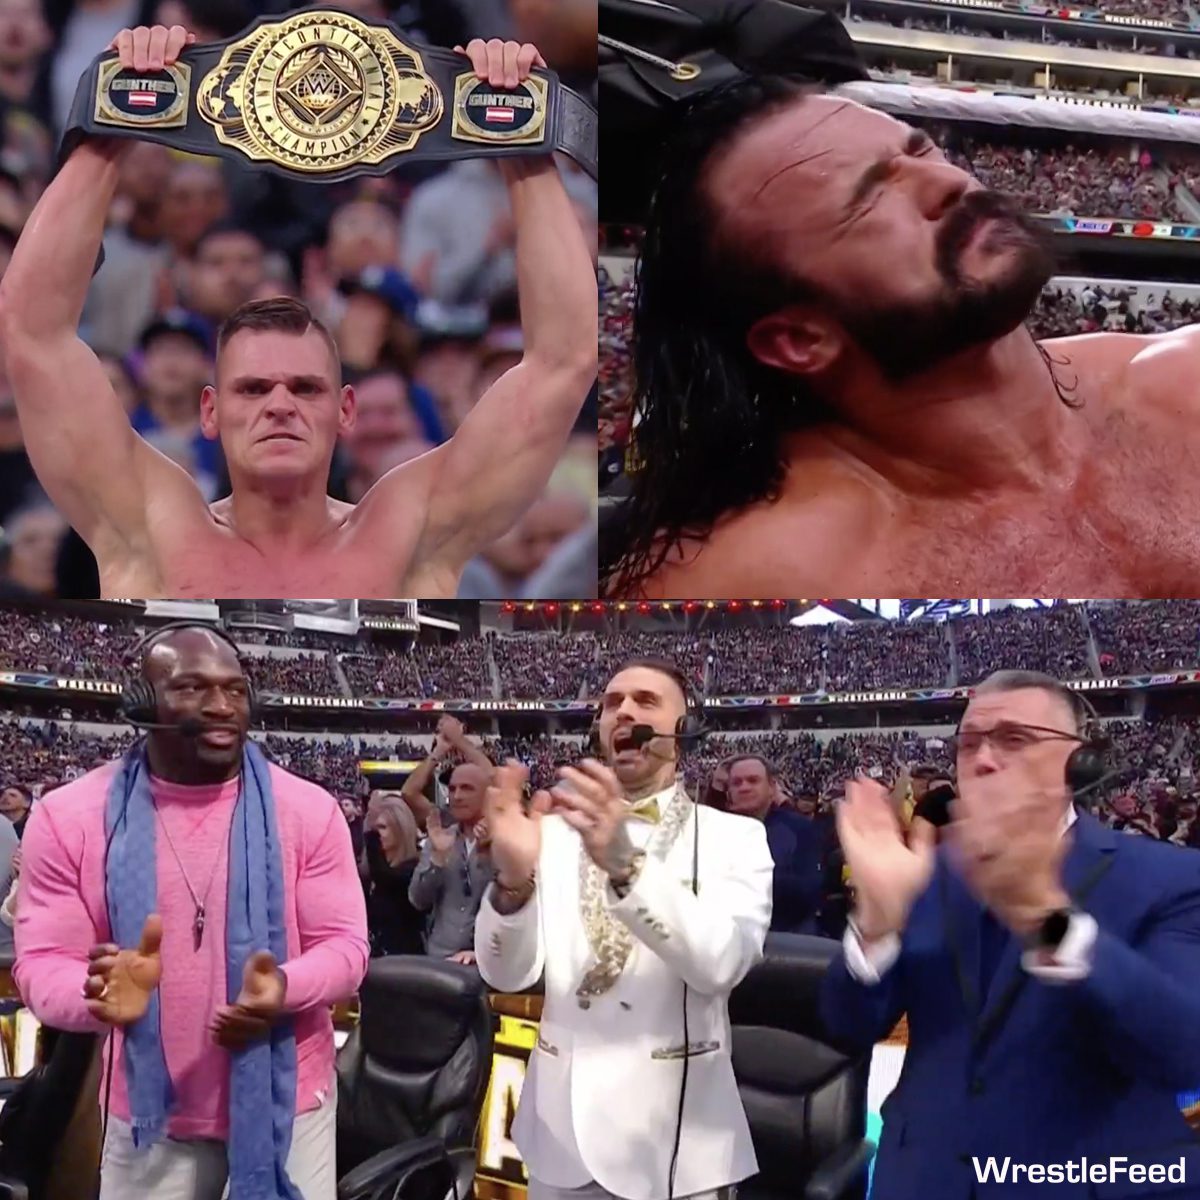 Standing ovation by WWE commentators for Intercontinental Championship match at WrestleMania 39 Sunday